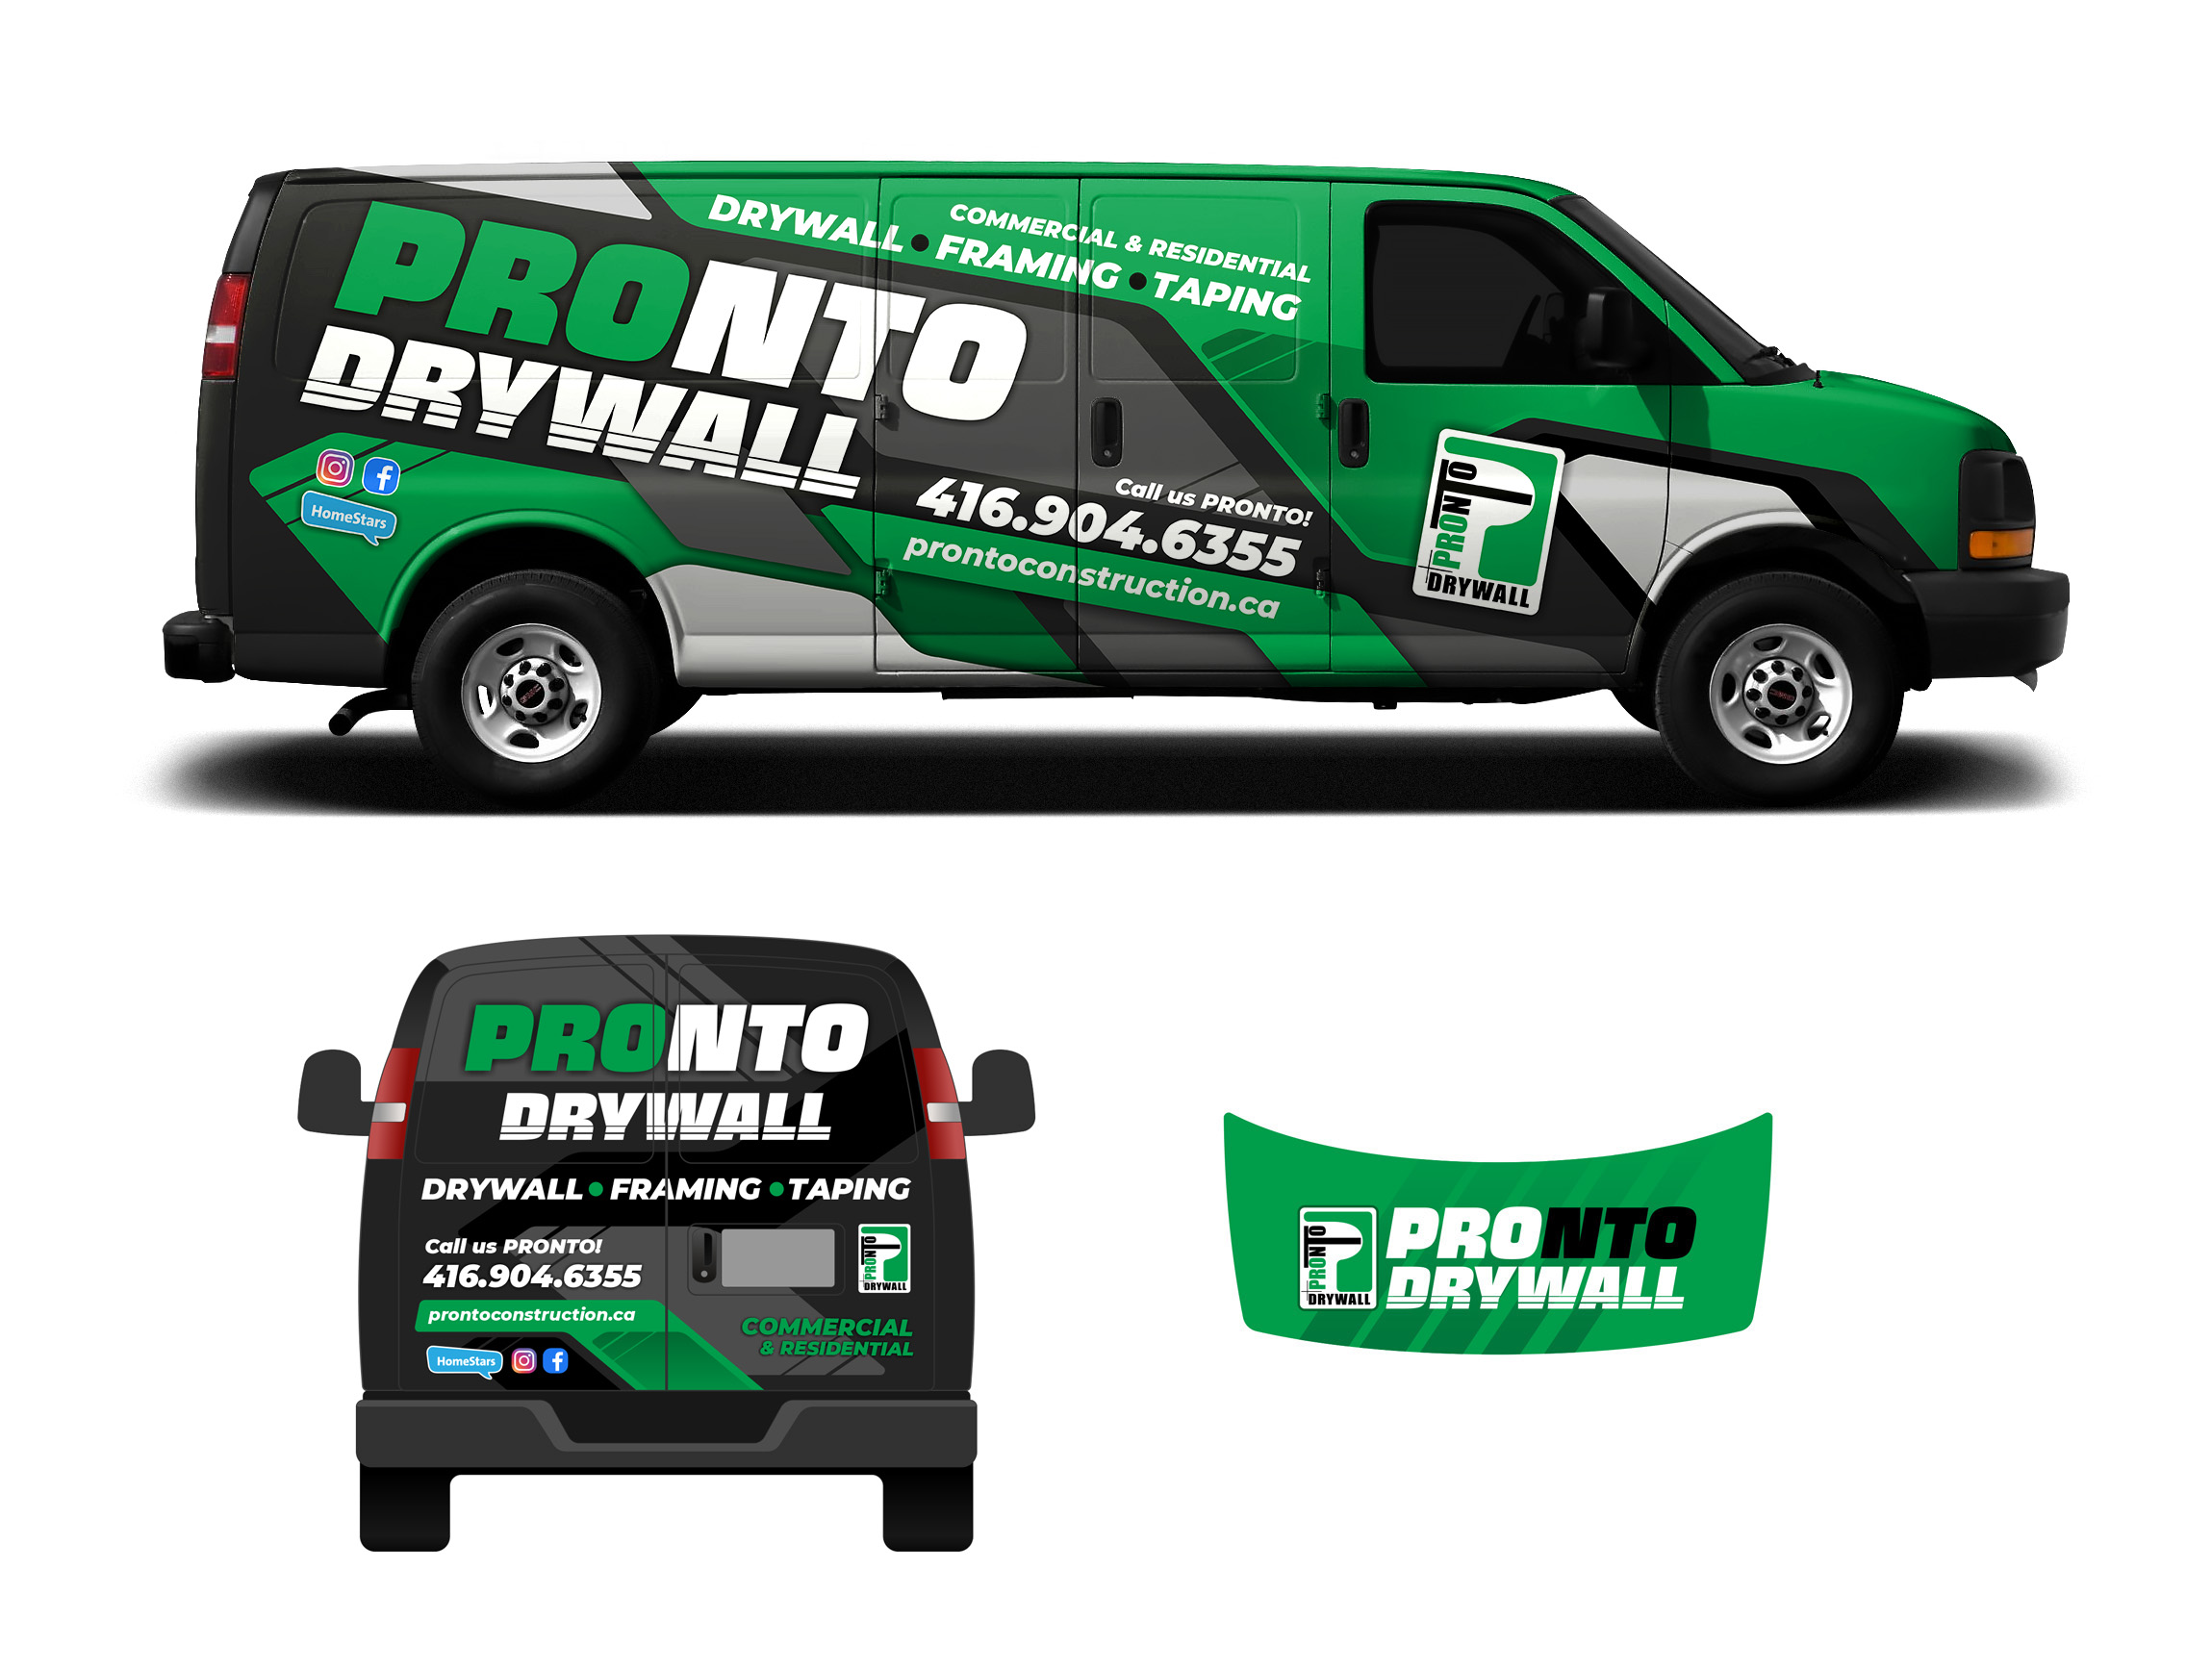 3 ways vehicle graphics can help market your business